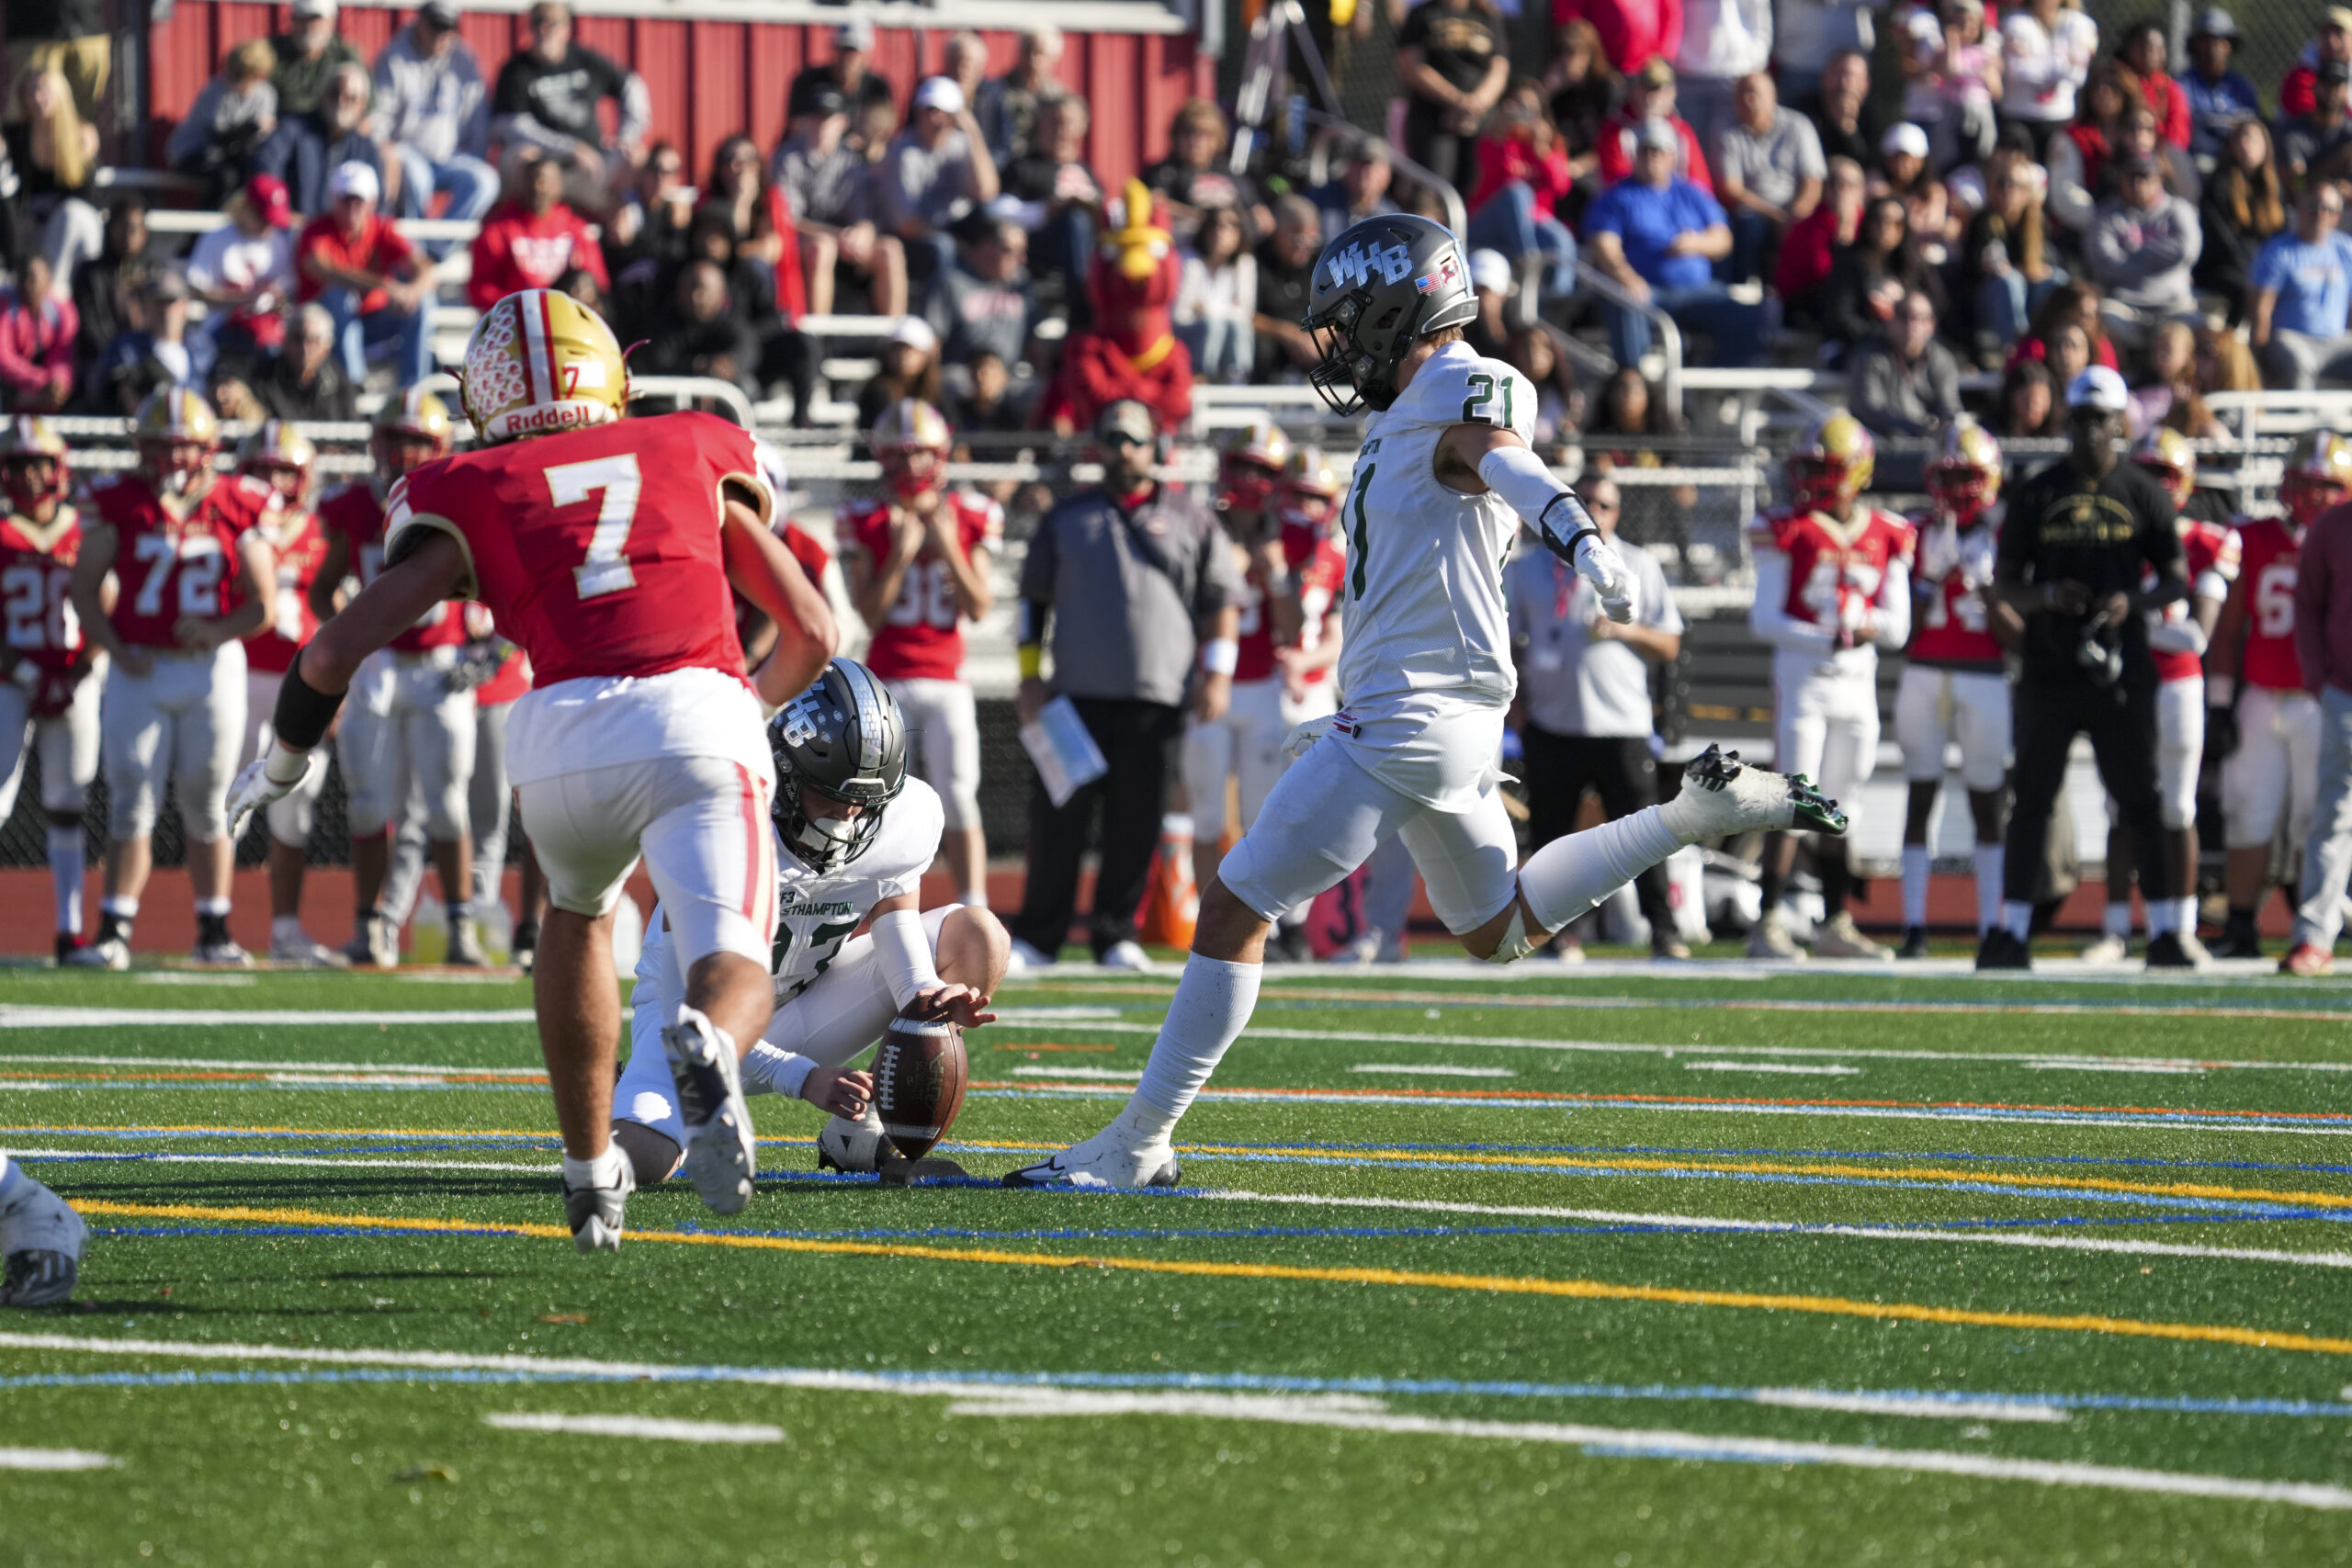 Westhampton Beach sophomore Brody Schaffer kicked a a pair of field goals and had a number of touchbacks on kickoffs throughout Saturday's game.   RON ESPOSITO